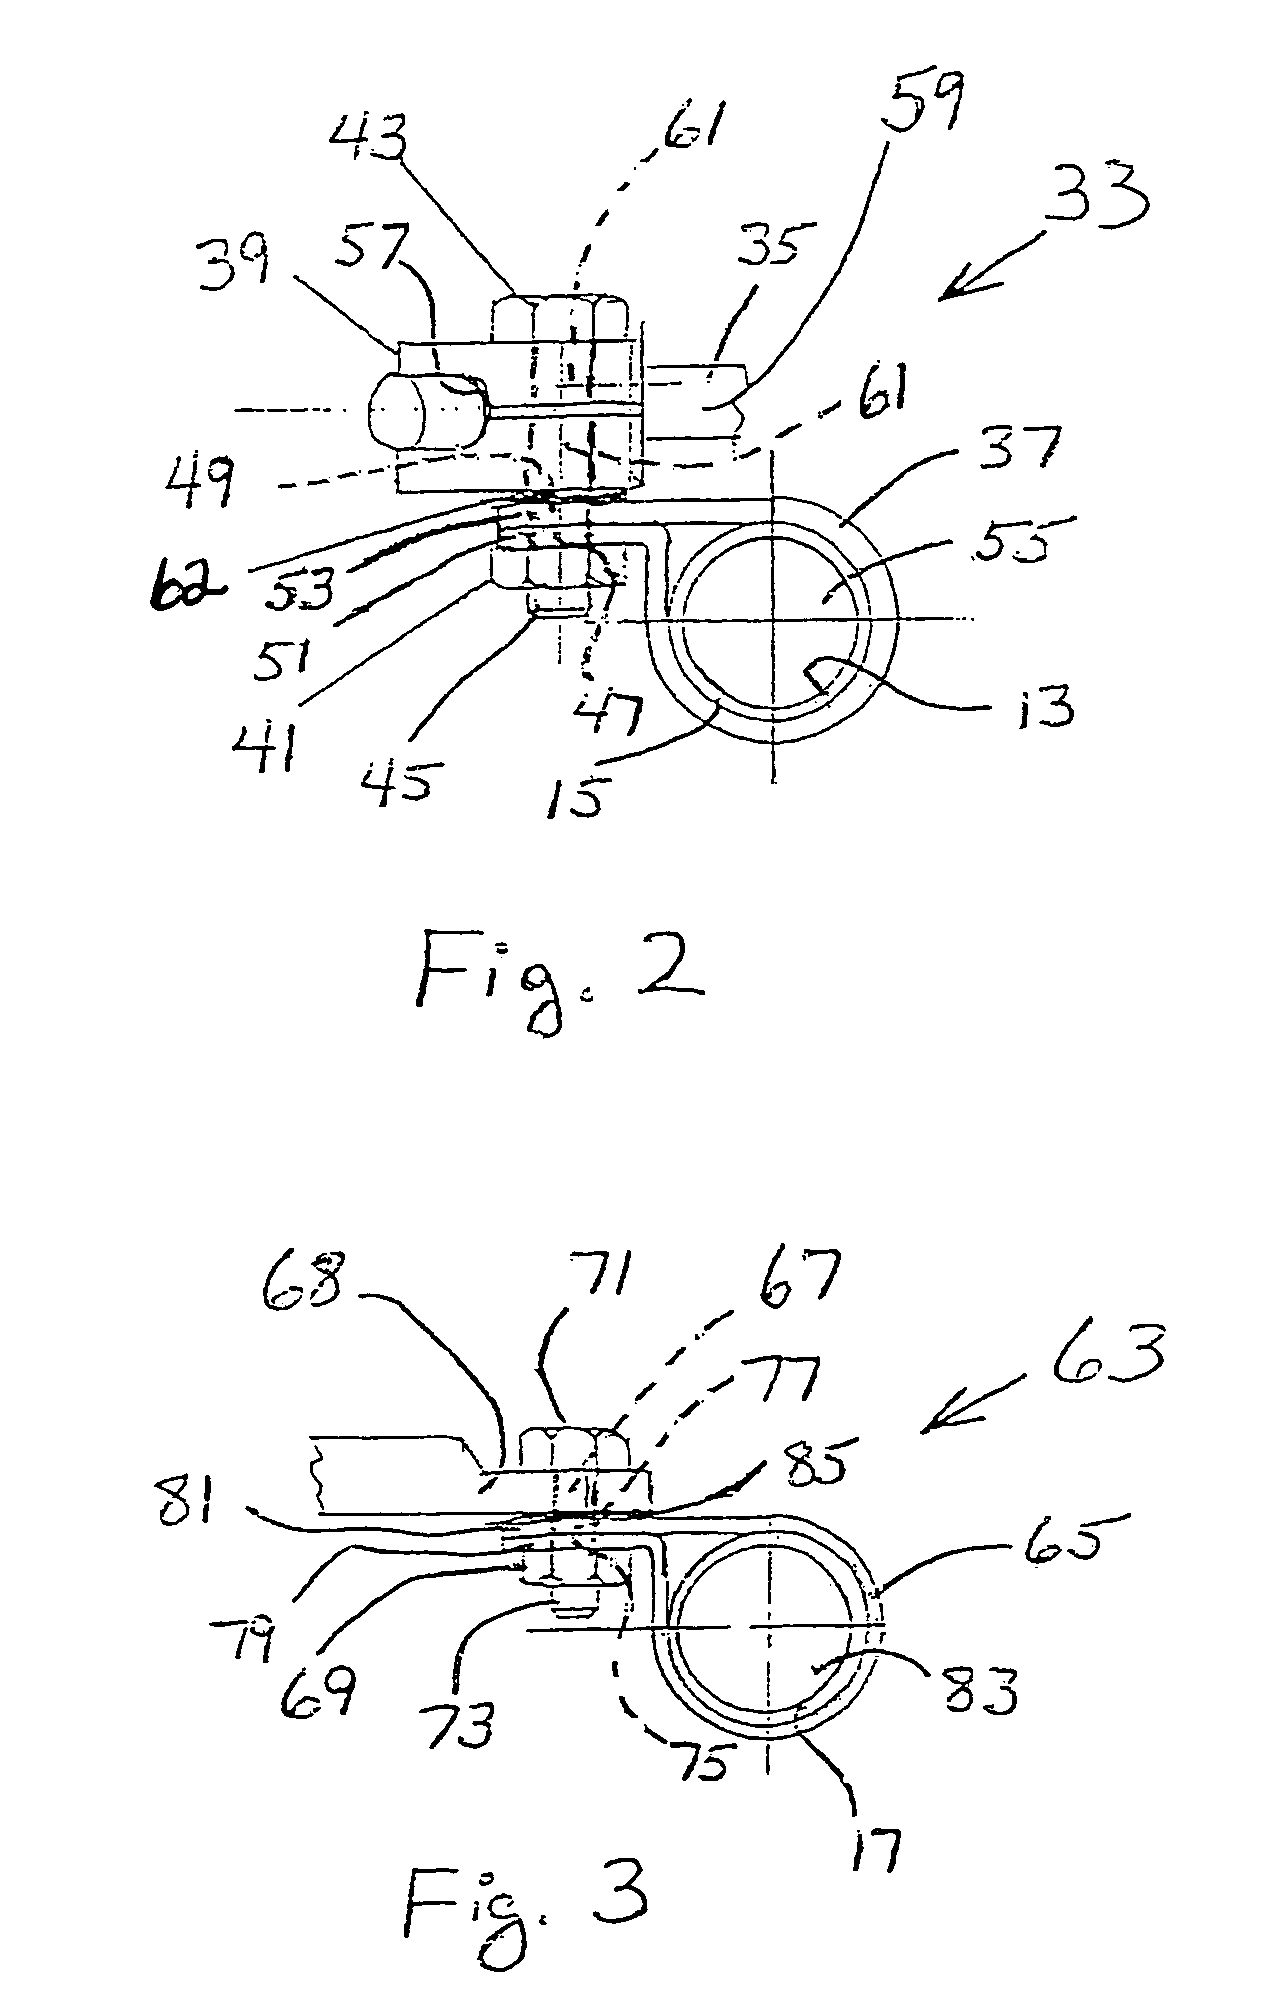 Fire sprinkler flexible piping system, bracing apparatus therefor, and method of installing a fire sprinkler